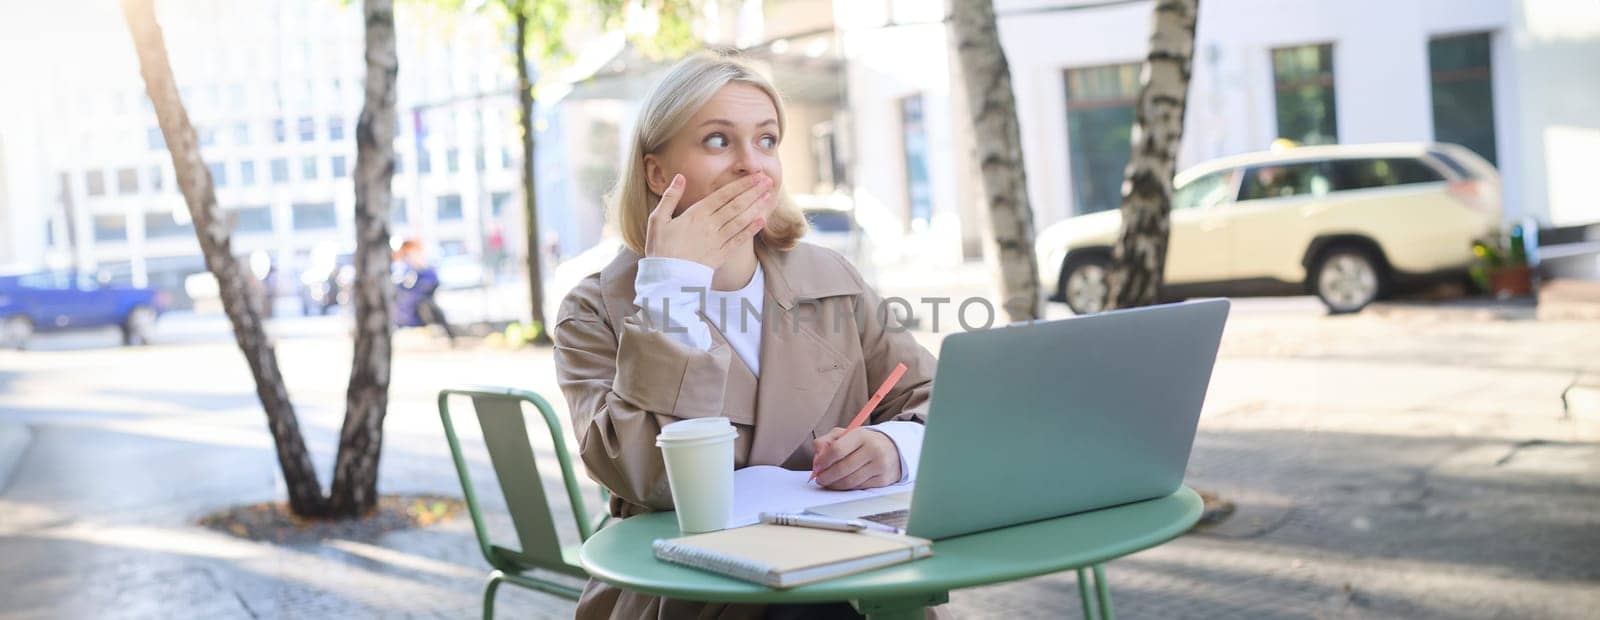 Image of woman sitting with laptop outside on street, using laptop, looking surprised, amazed by something she saw online.